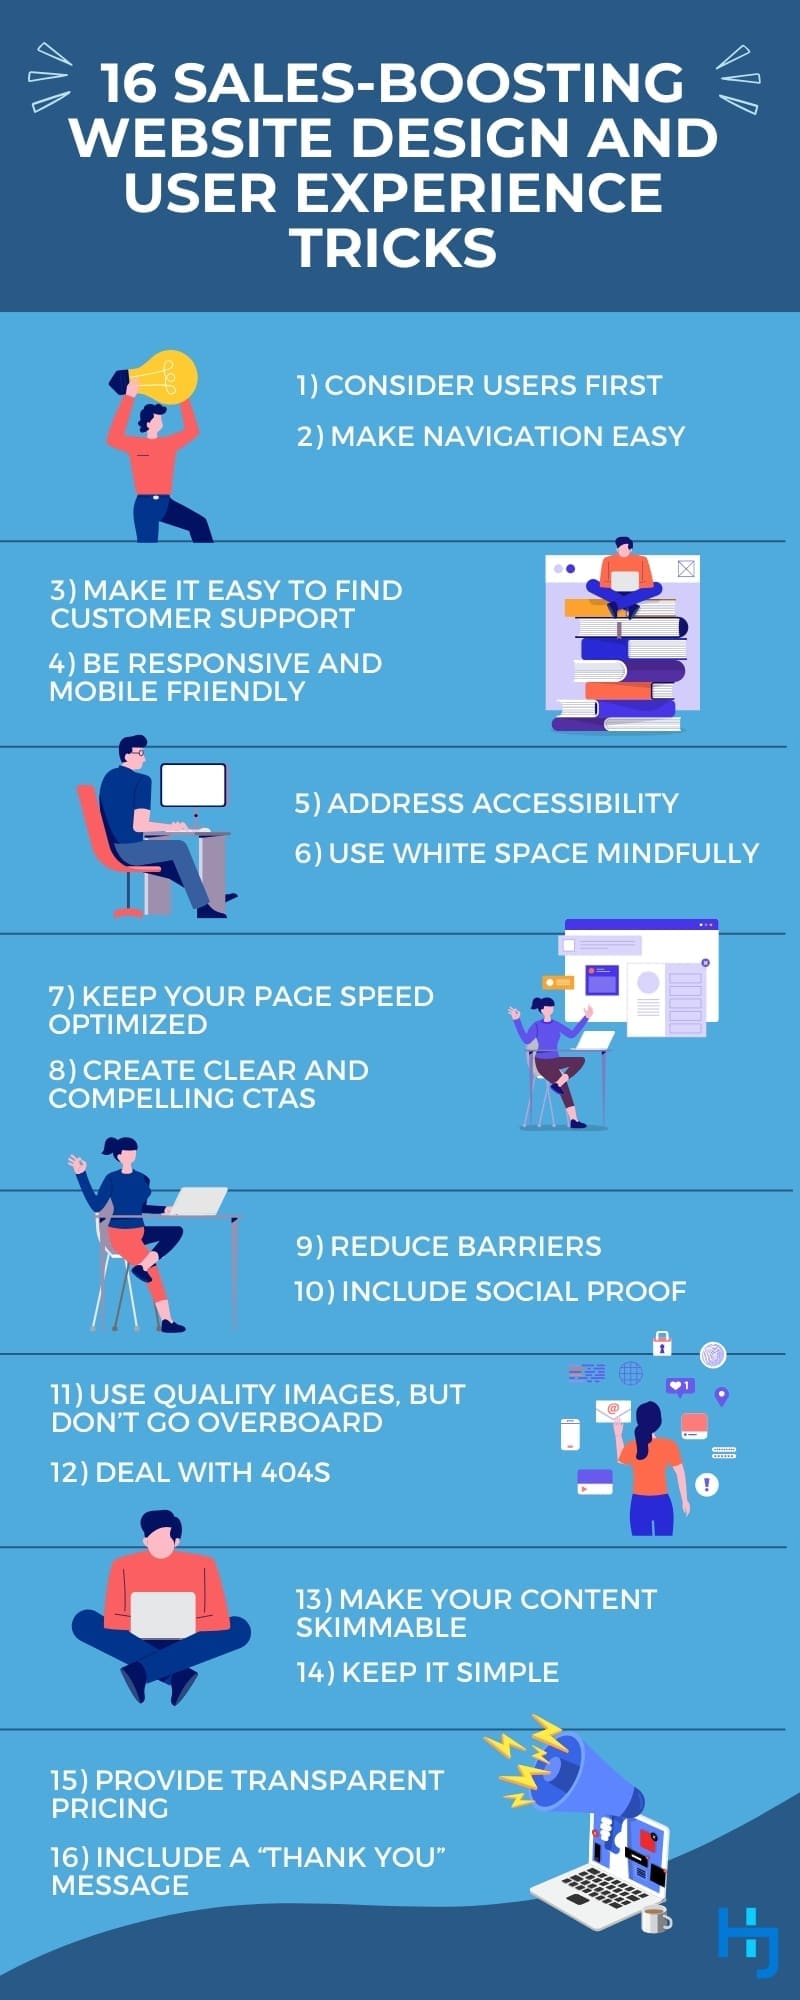 16 Sales-boosting Website Design and User Experience Tricks Infographic